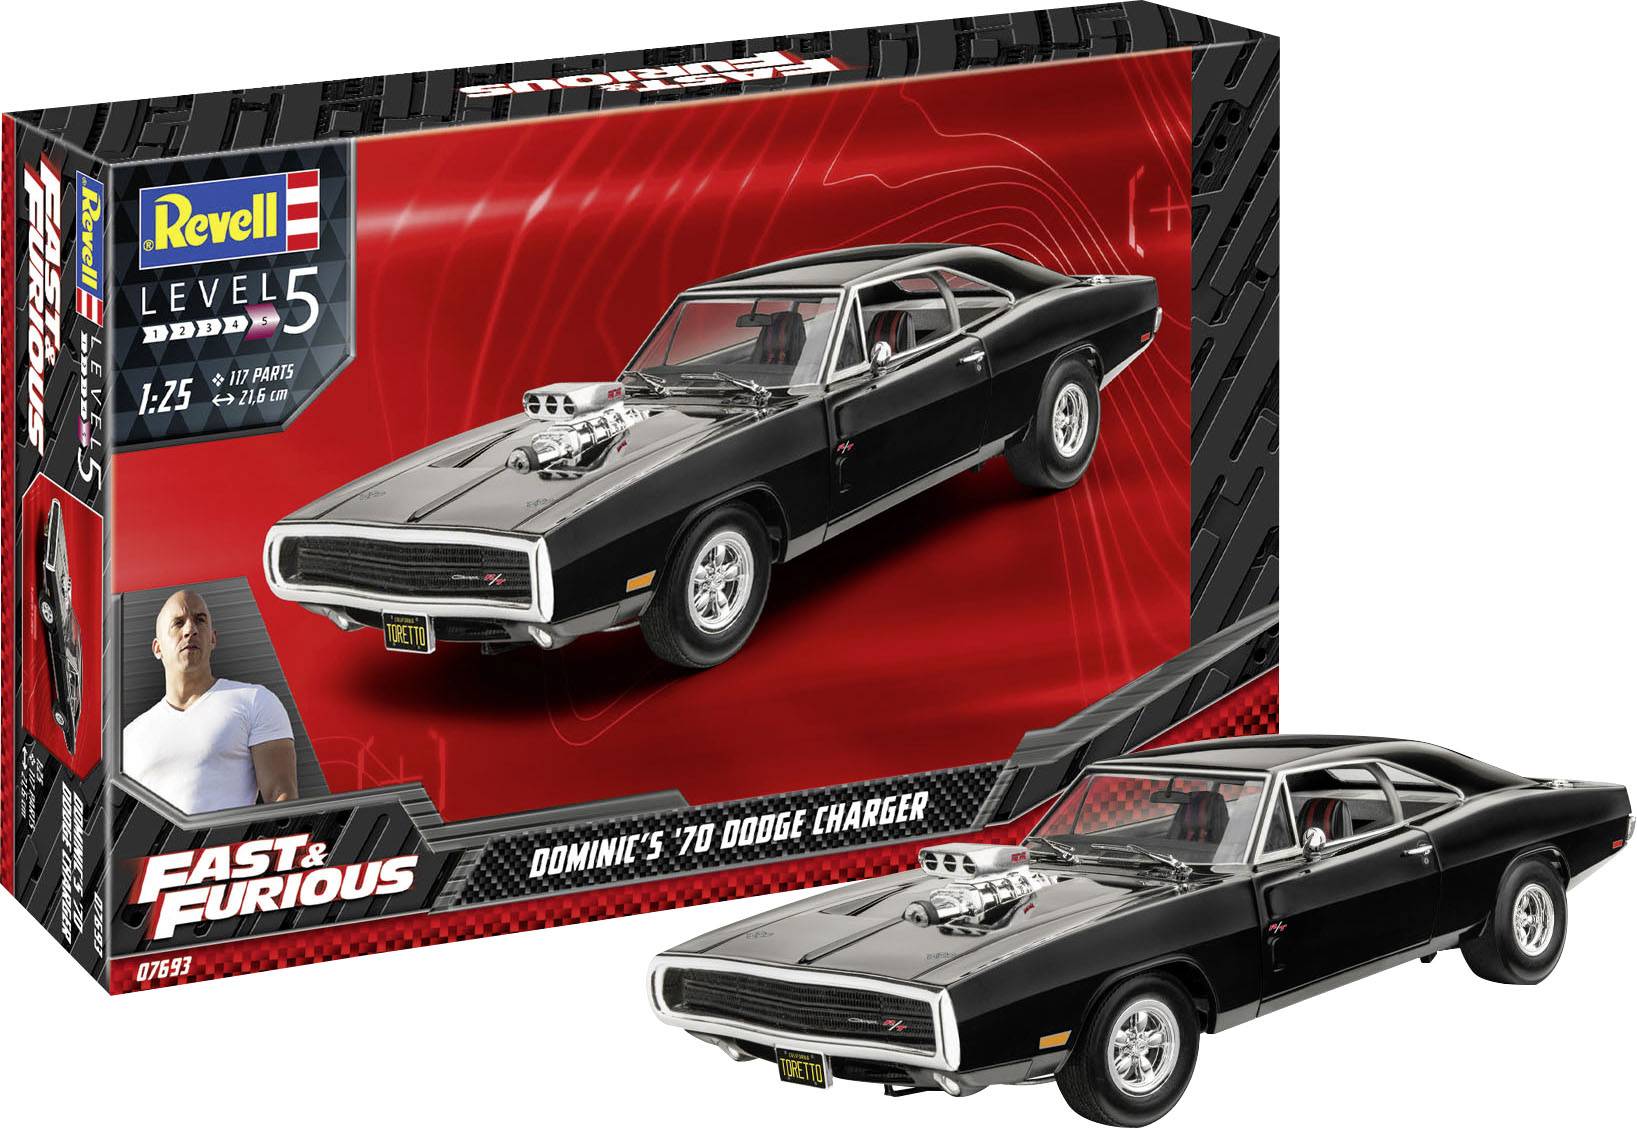 Revell RV 1:24 Fast & Furious - Dominics 1970 Dodge Charger 1:24 Model car